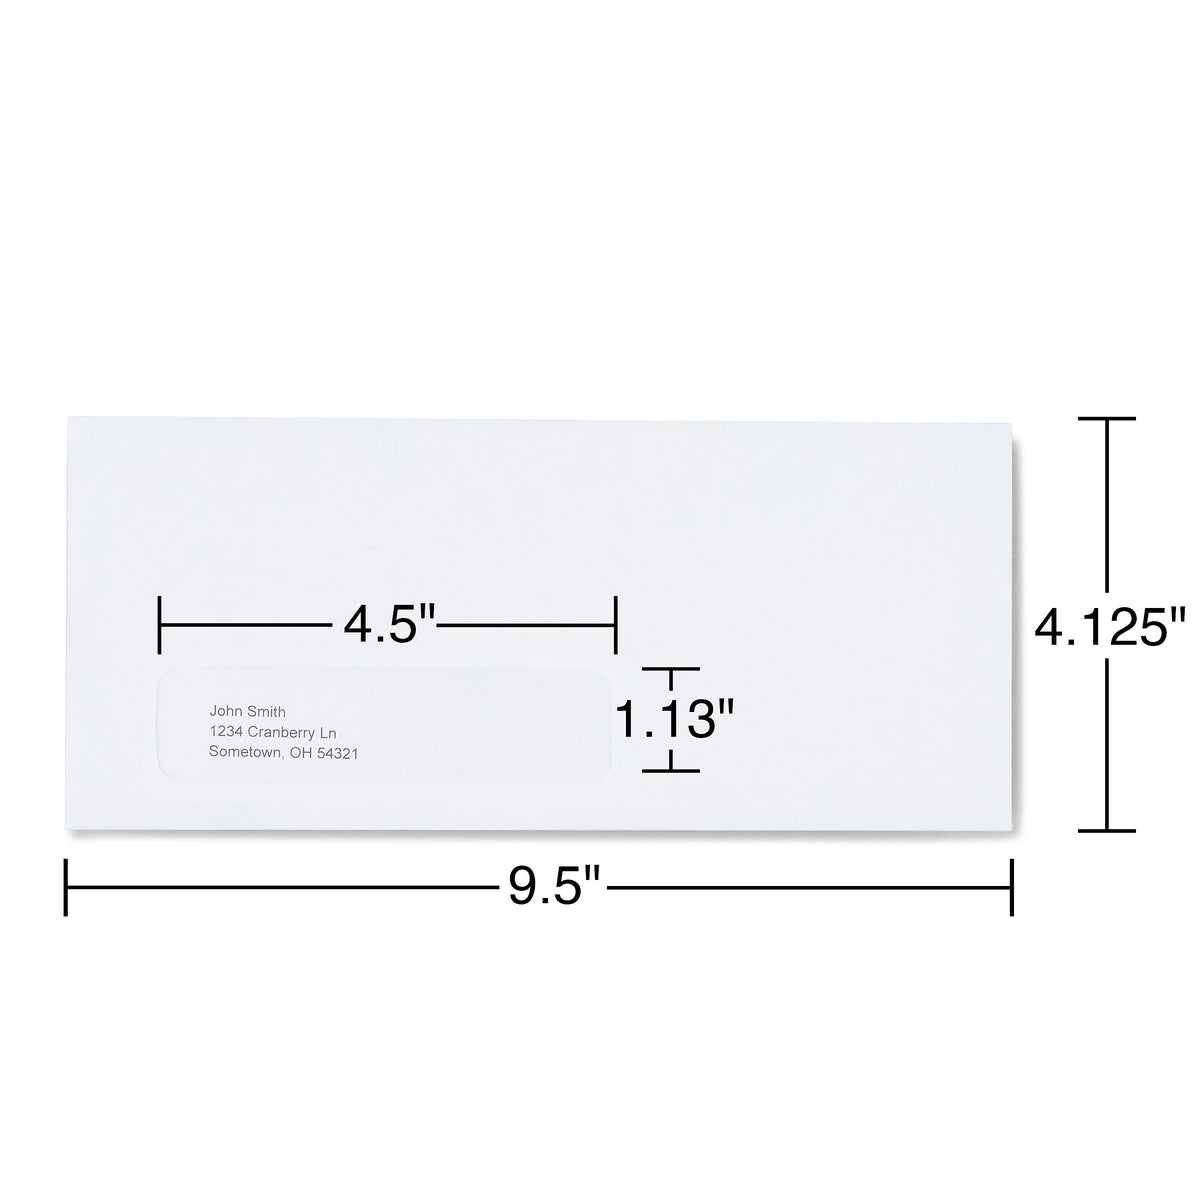 Staples™ Gummed Security Tinted #10 Business Window Envelopes, 4 1/8" x 9 1/2", White Wove, 500/Box